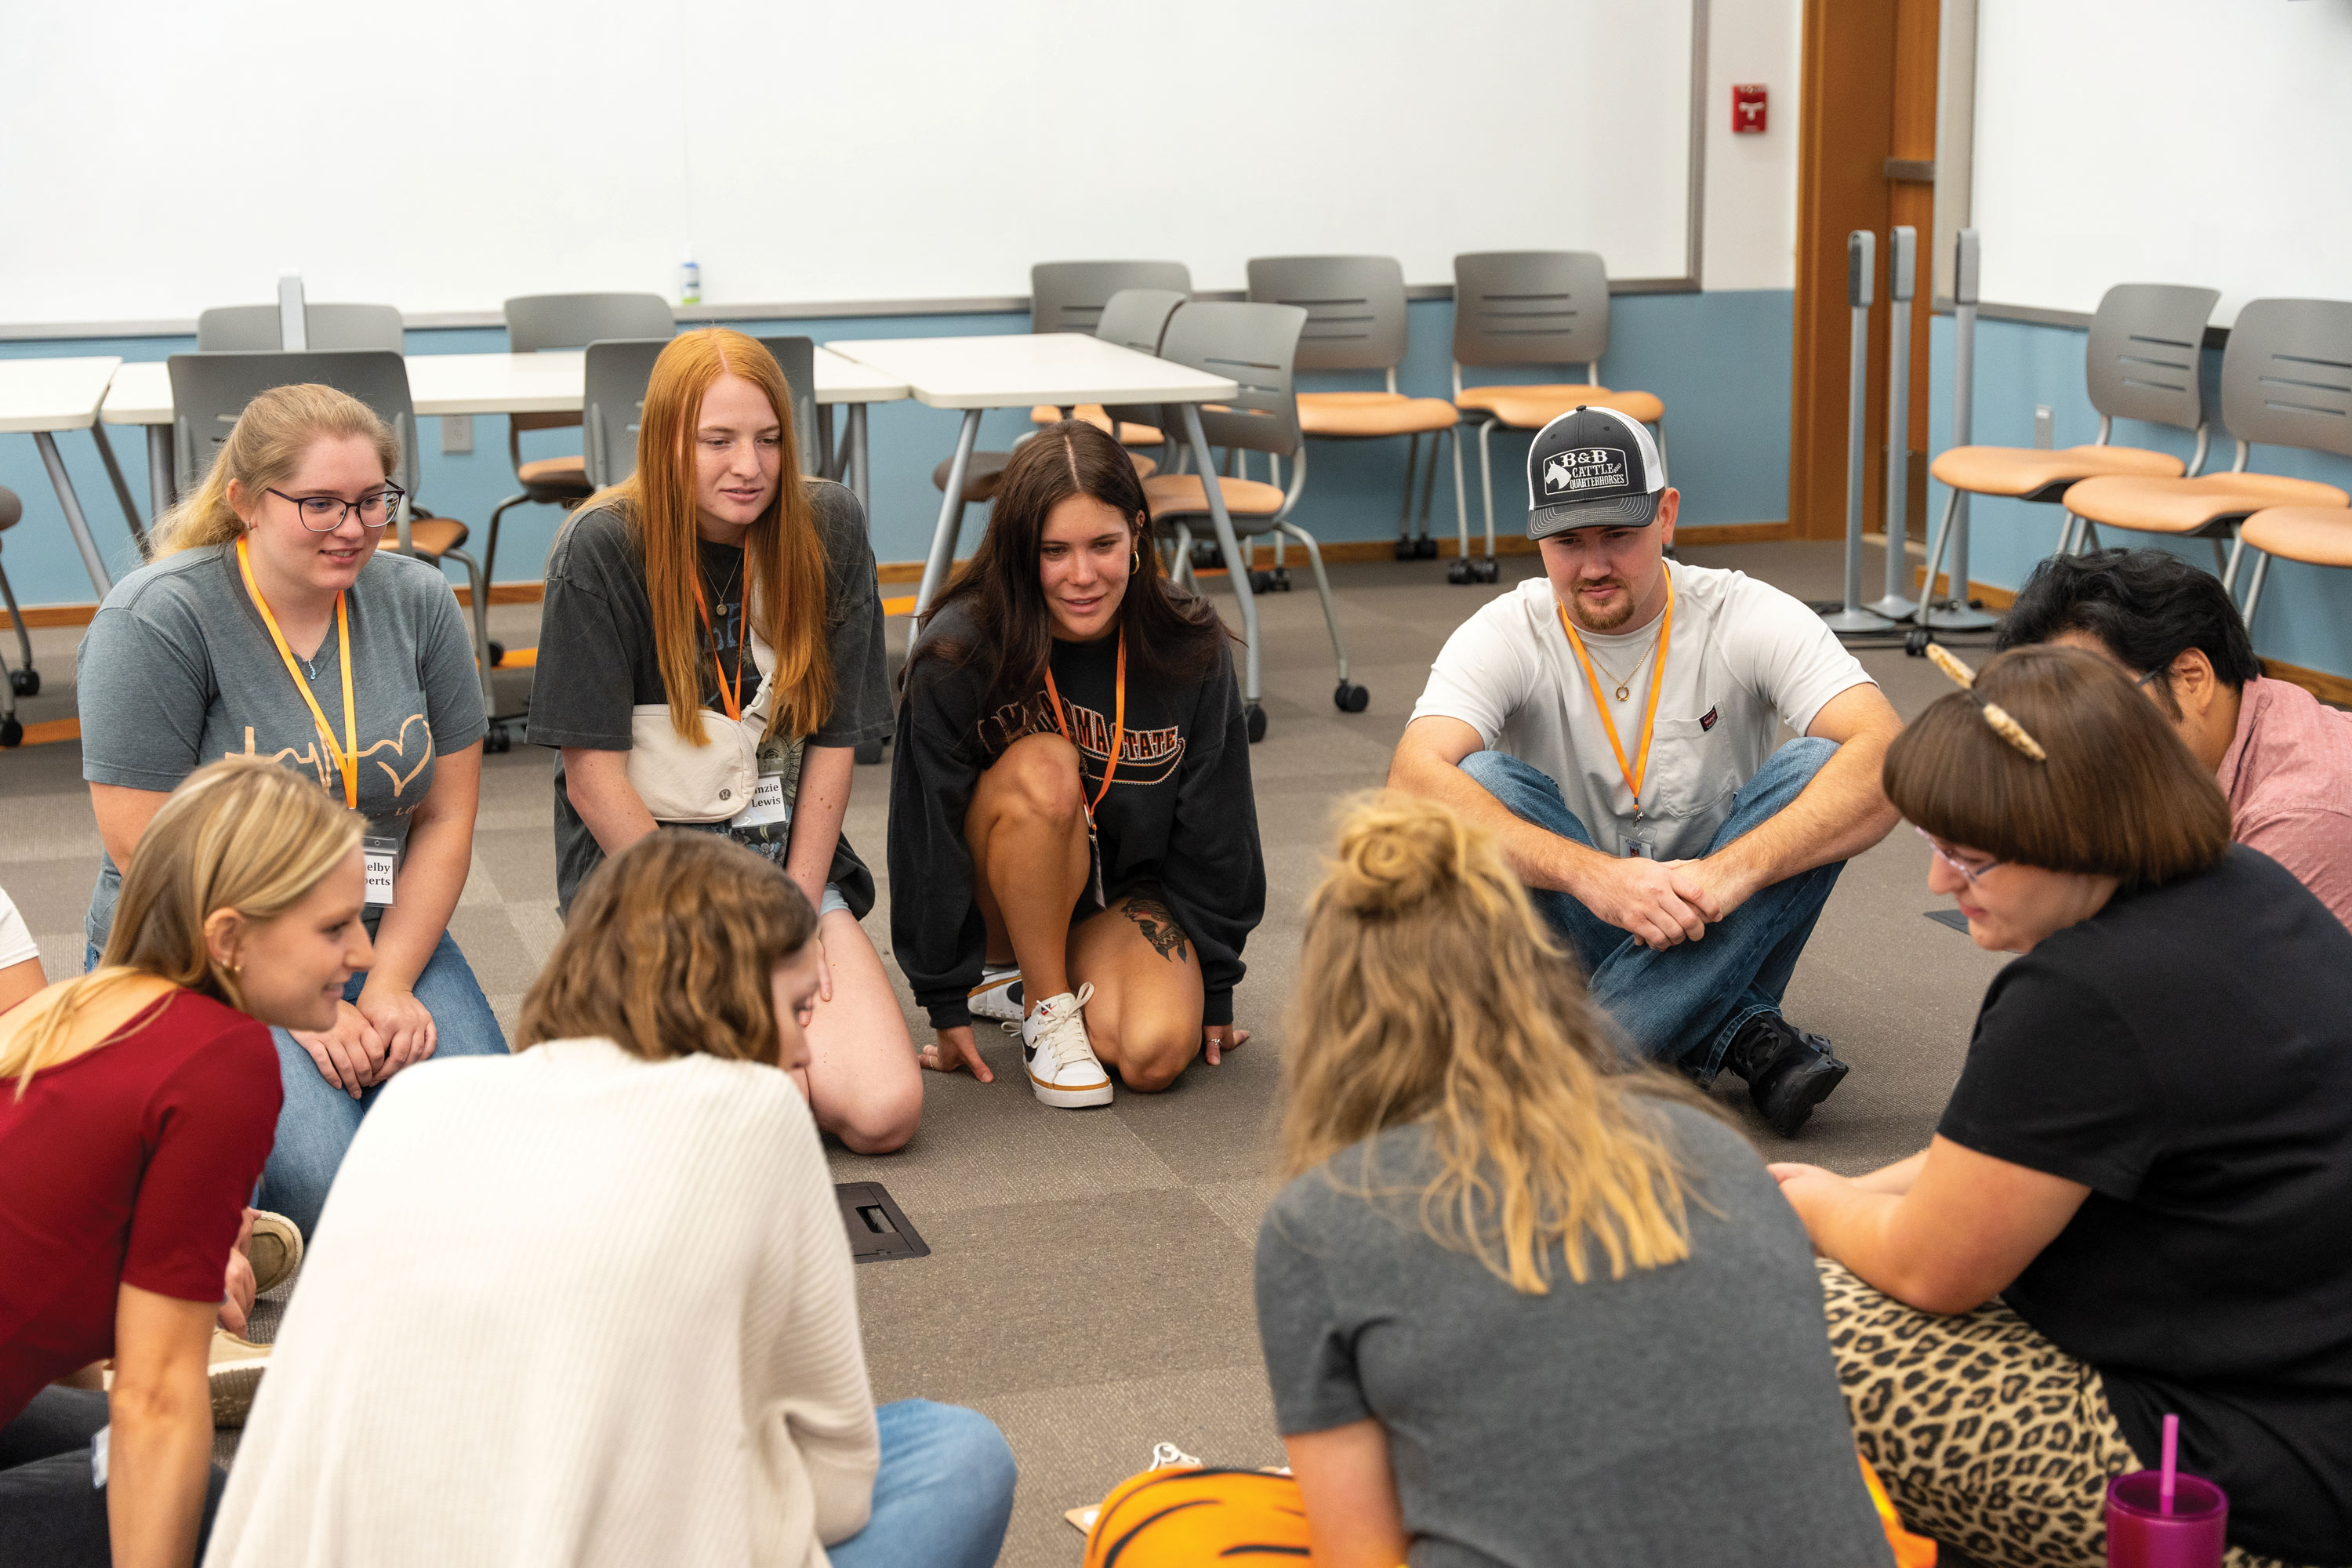 Students get to know each other at orientation.